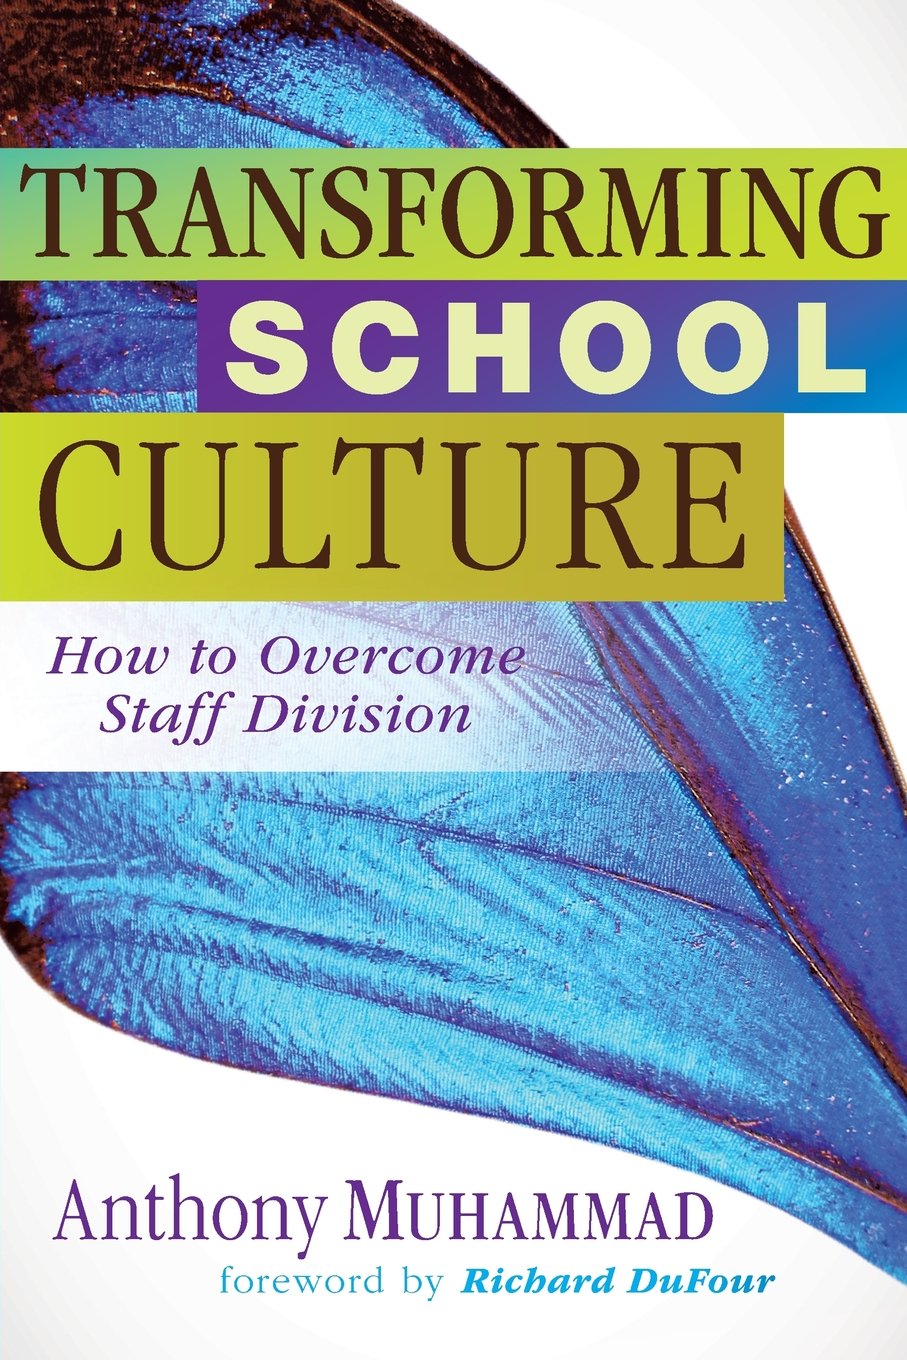 TRANSFORMING SCHOOL CULTURE: HOW TO OVERCOME STAFF DIVISION